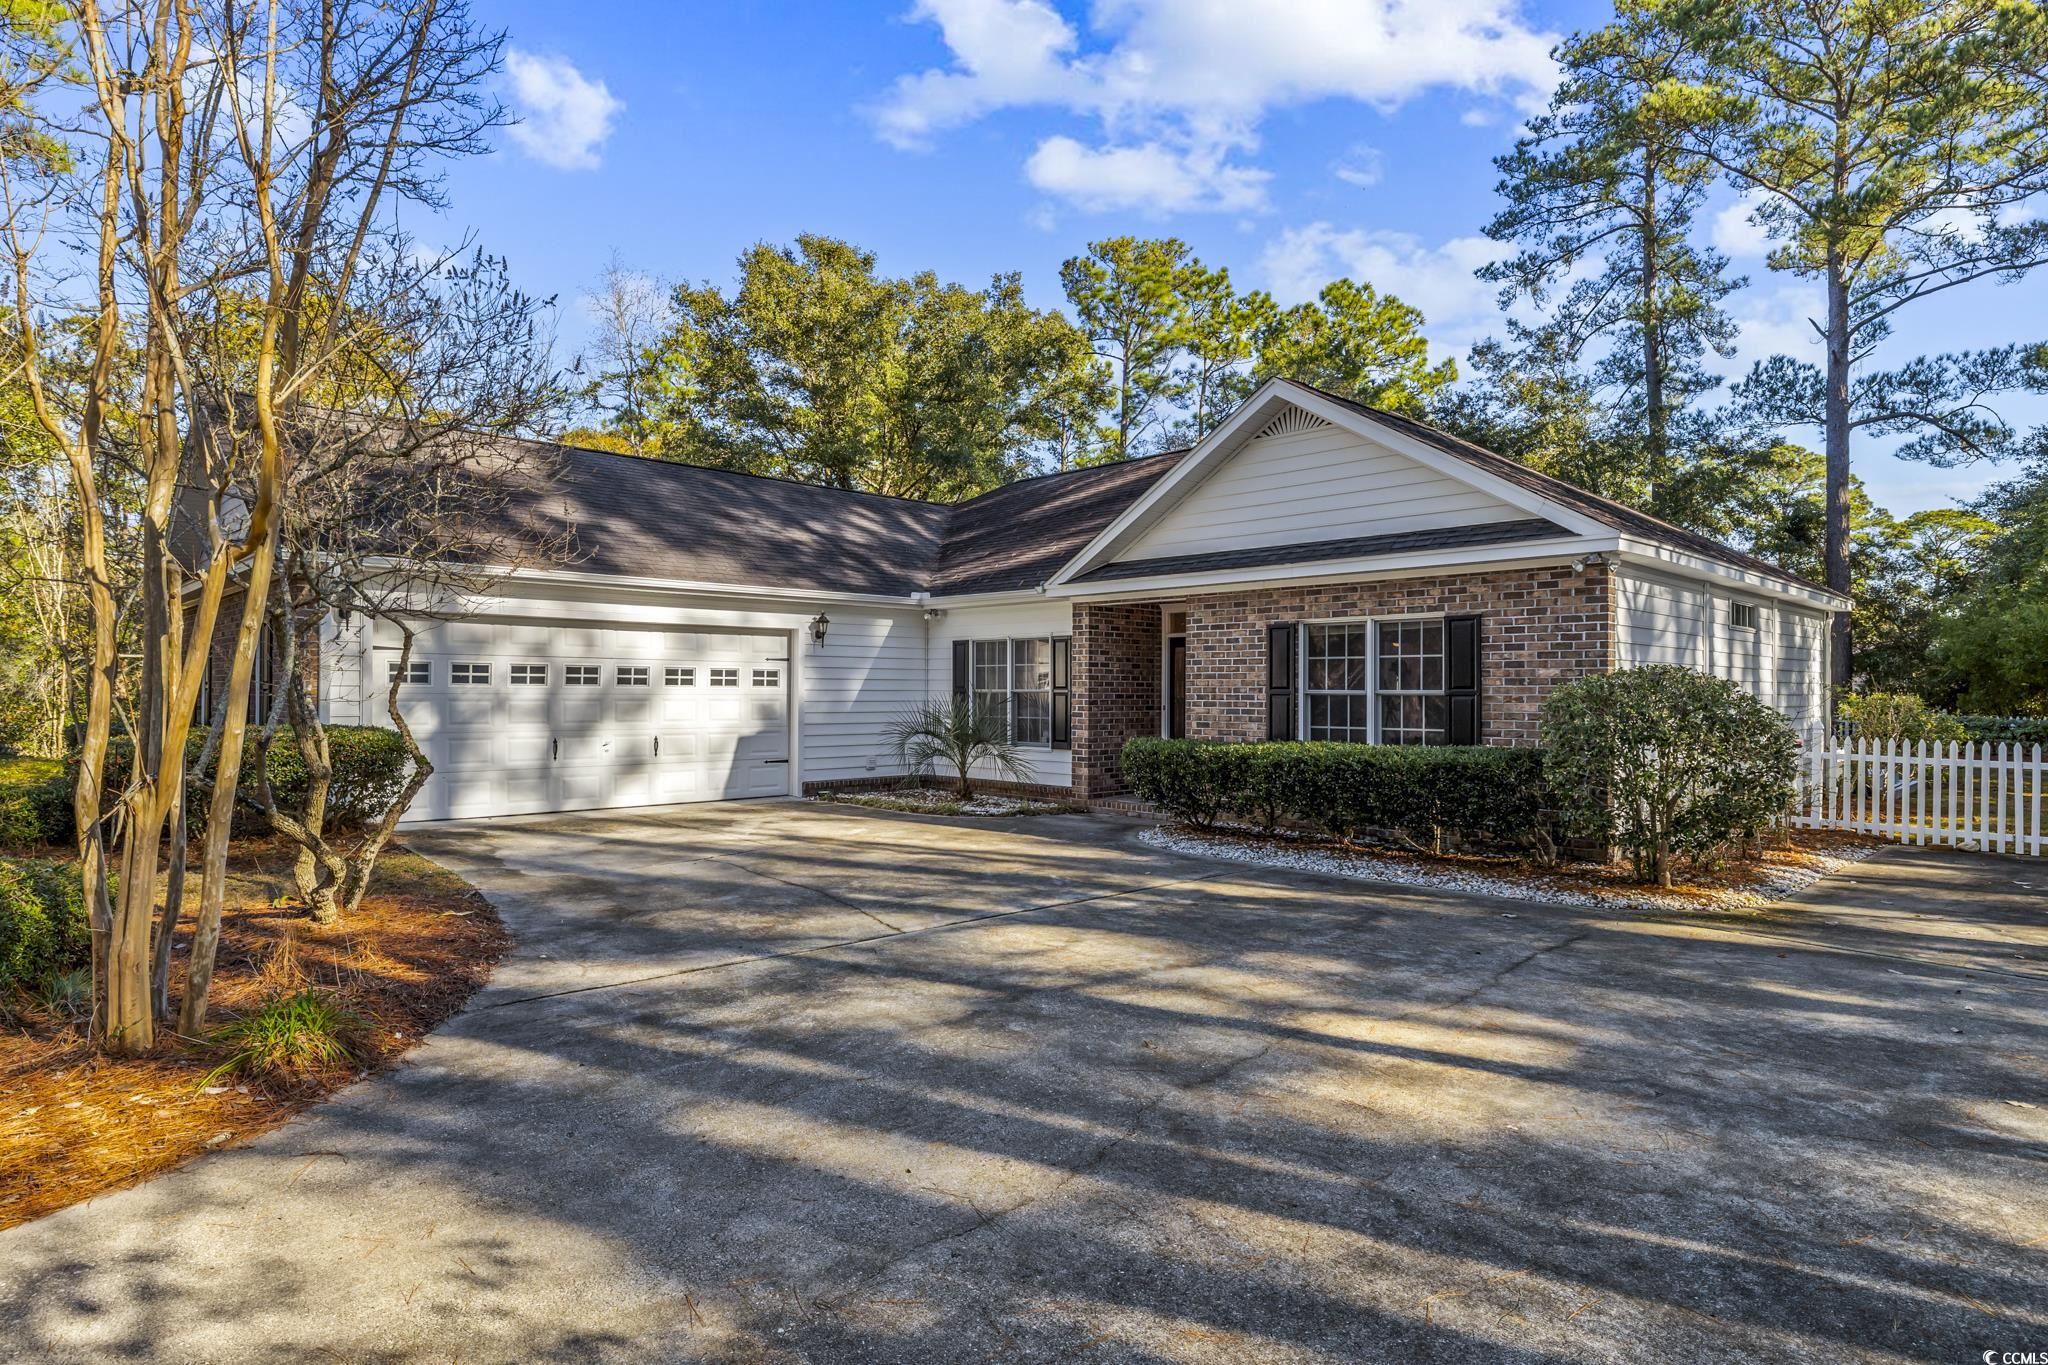 568 kings river rd in hagley estates. a highly sought after pawleys island address, about a mile from the waccamaw river and public boat launch, close to the beach, true blue, caledonia golf, on a wooded, fenced lot (.41 ac, azaleas, gardenias, tea olives, hardwoods and pines) and best of all the hagley estates homeowners association is voluntary! this 3 bed, 2 bath home split bedroom plan is open and bright with a laid back low country charm - living areas all on one level. kitchen and dining area open to the great room, vaulted ceilings, two lighted niches for plants or art display, built-in desk with shelves and drawers for storage, vented gas log fireplace and blower to warm you on those chilly carolina mornings. kitchen has a breakfast bar, stainless appliances, deep, double stainless sinks, solid surface tops, 36” and 42” craftsman style cabinets with soft close drawers and doors, adjacent to the 10 x 6 utility area (shelving, cabinets and corner storage for small appliances). from the great room you enter the 22 x 13 carolina room through double 15-lite french doors, featuring four windows open to the back yard and sliding doors on each end that flank open decks (14 x 14 and 14 x 21) with built-in seating, perfect for entertaining guests. luxurious owner suite: tray ceiling, crown and access to the 14x21 open deck, double walk-in closets, master bath has whirlpool tub, custom tile shower and glass tile accent, storage/linen closet, double vanity with solid surface tops and comfort height commodes in both baths. on the opposite side of the home you’ll find 2 guest bedrooms (14 x 12 and 14 x 13, remote controlled fans, crown) and shared guest bath, upgraded vanity, tub shower combo and transom for natural light. wait, there’s more. in the backyard there are two detached storage buildings (12 x 8, 10 x 7) offering many possibilities. there is no need to buy bottled water anymore, there is a whole house water filtration system located in one of the guest bedroom closets. you’ll be glad to have backup electricity from your generac generator powered by two 100 gallon above ground propane tanks (rental). also, there’s a buried 120 gallon propane tank on the opposite side of the property. and just in case you’re wondering, the answer is yes, there is room for a pool. courtyard entry 550 square foot garage provides enough room for two larger vehicles. the driveway extension allots room for boat parking. brick and vinyl low maintenance exterior. new heating and air installed 2021. (images depicting furniture are virtually staged and are for demonstration purposes only)